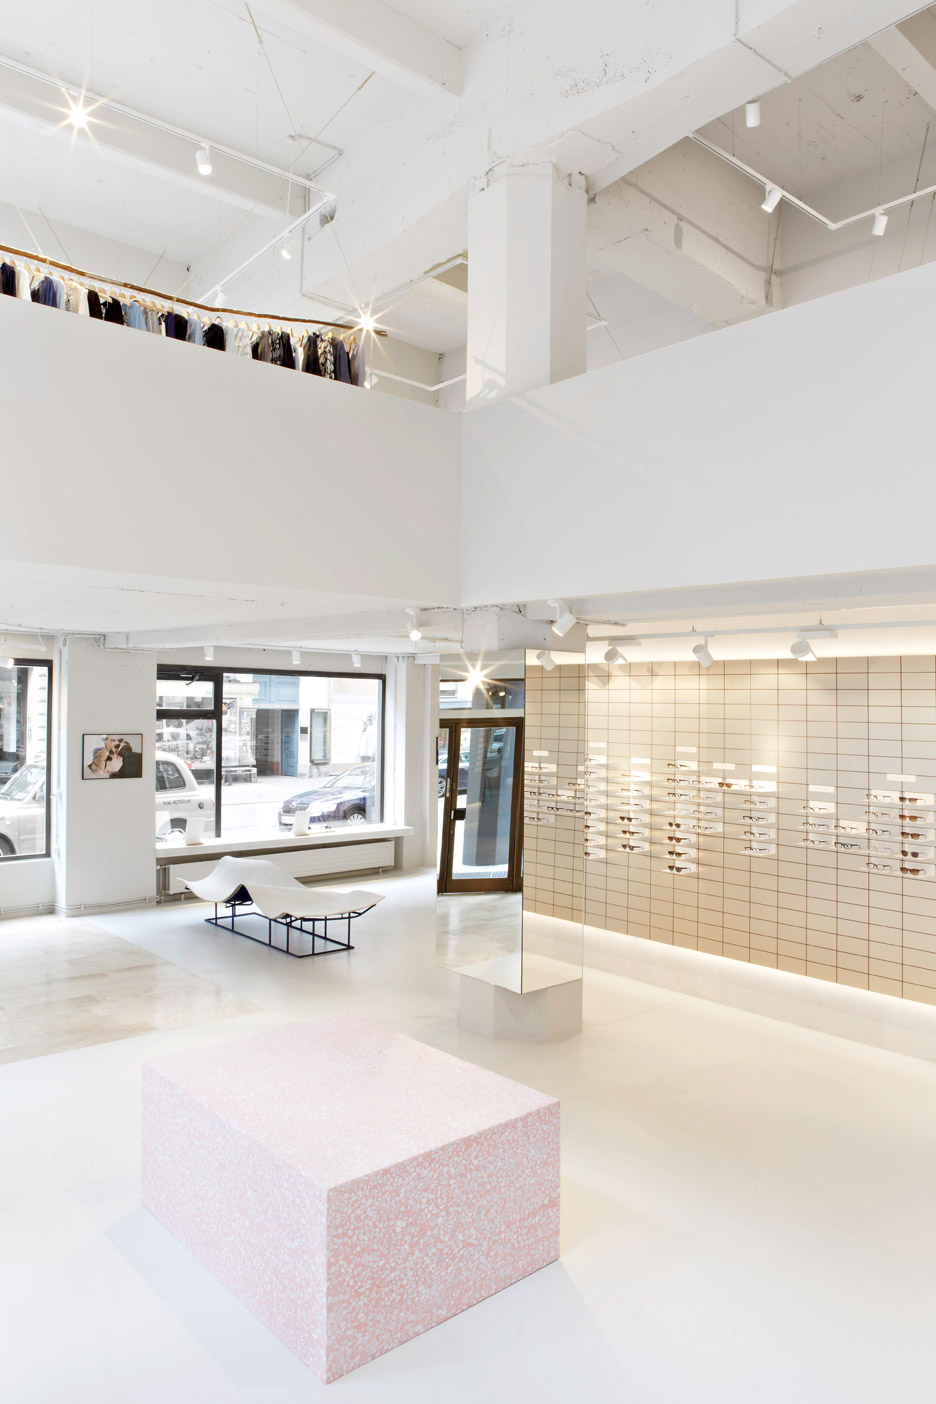 Viu eyewear creates gallery-like space for its Vienna flagship store